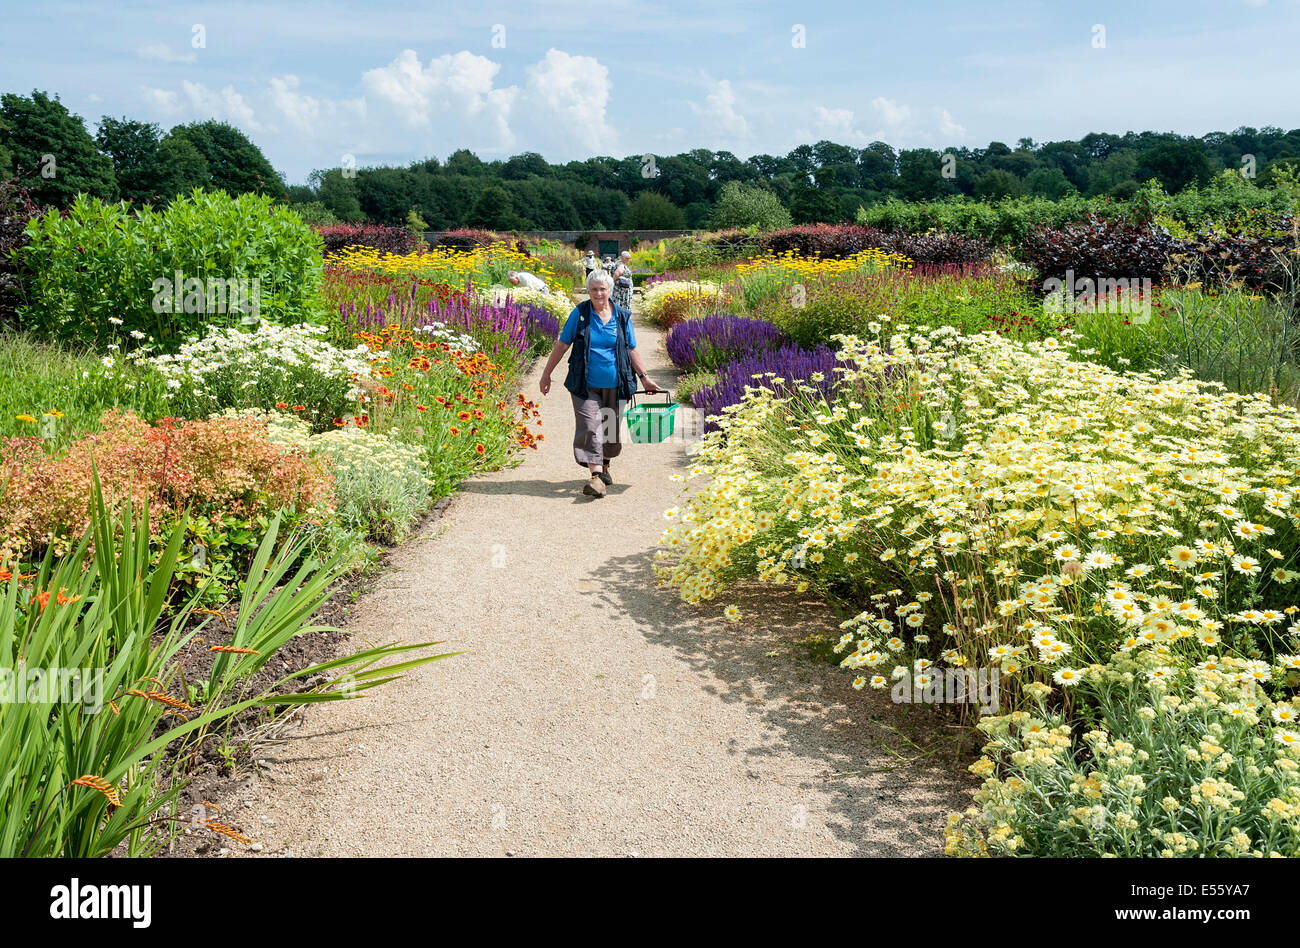 A shopper collecting plants on a sunny day at Helmsley walled garden Stock Photo